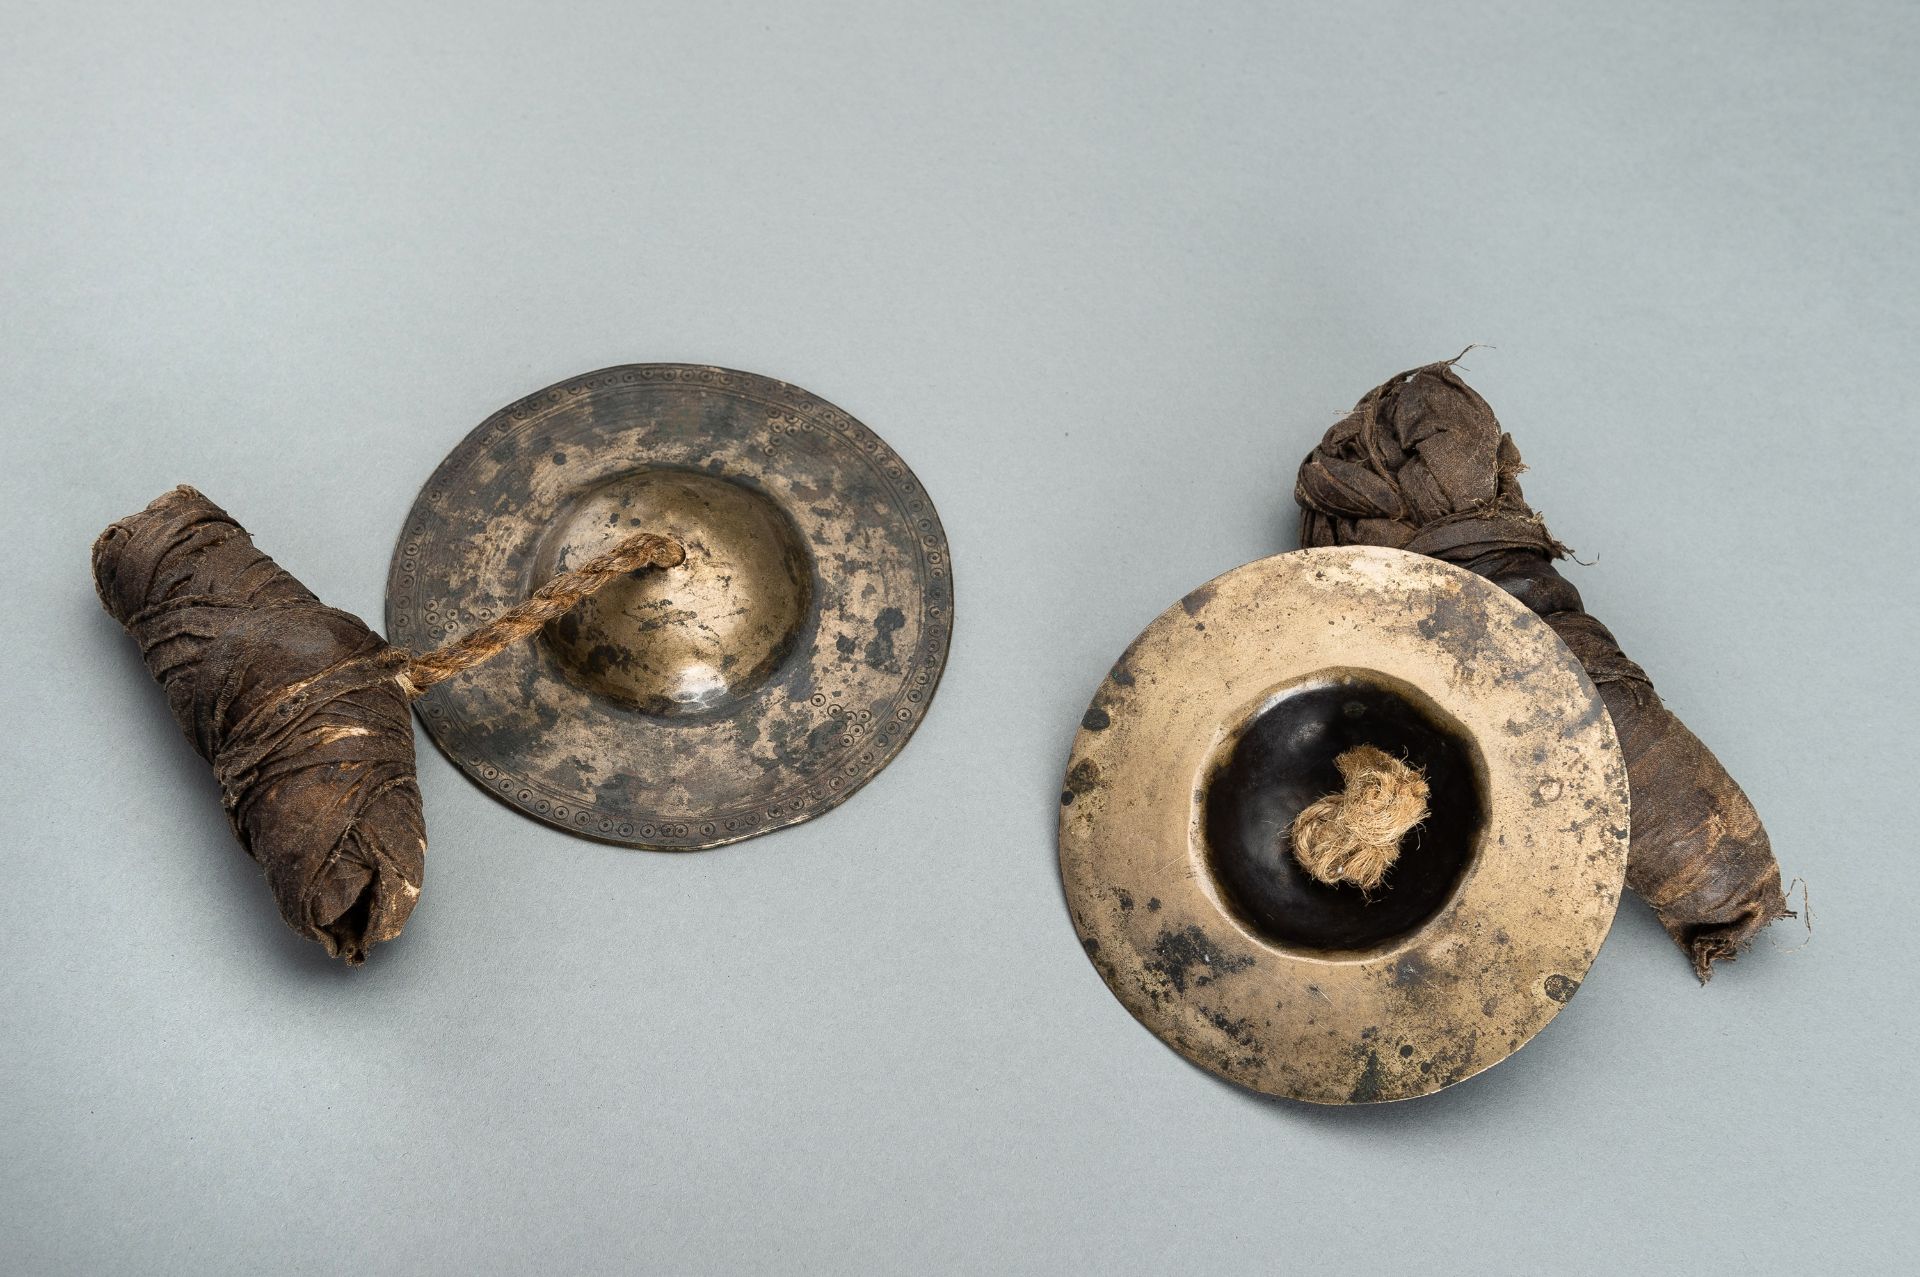 A RARE PAIR OF BRONZE CYMBALS, 19th CENTURY - Image 7 of 10